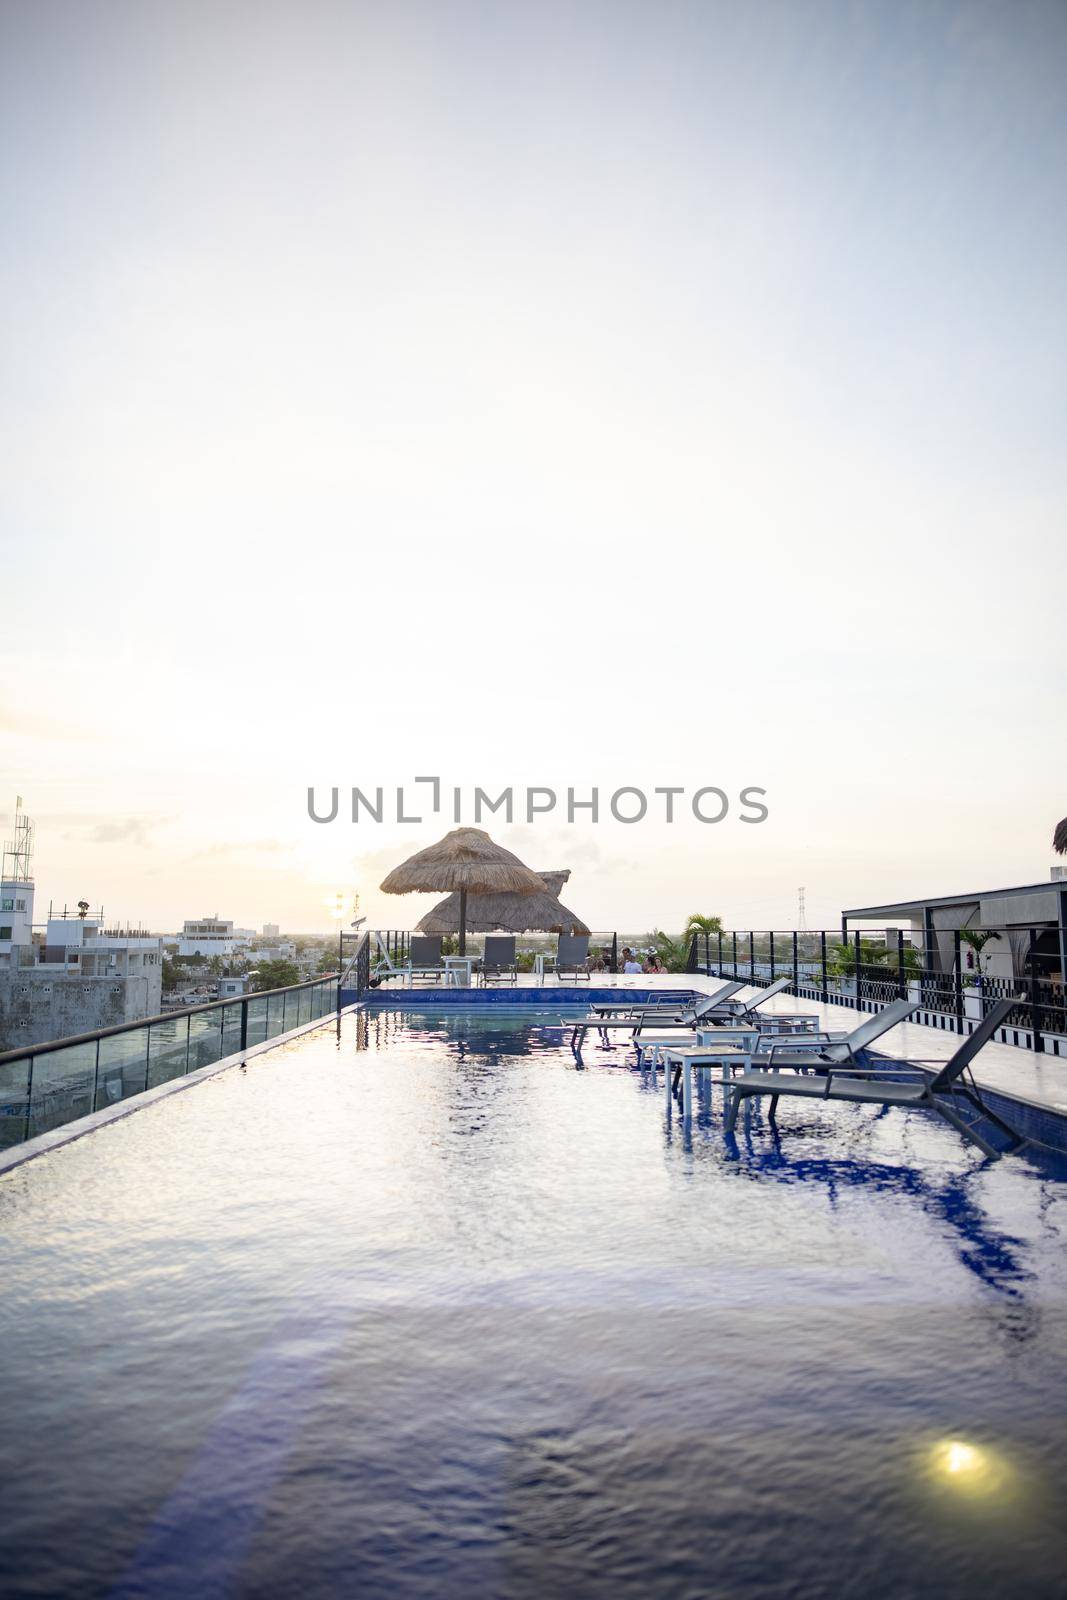 Beautiful view of umbrellas and shallow pool with beach beds in hotel under bright sky. Peaceful view of white skyline above tropical resort rooftop. Holidays and landscapes